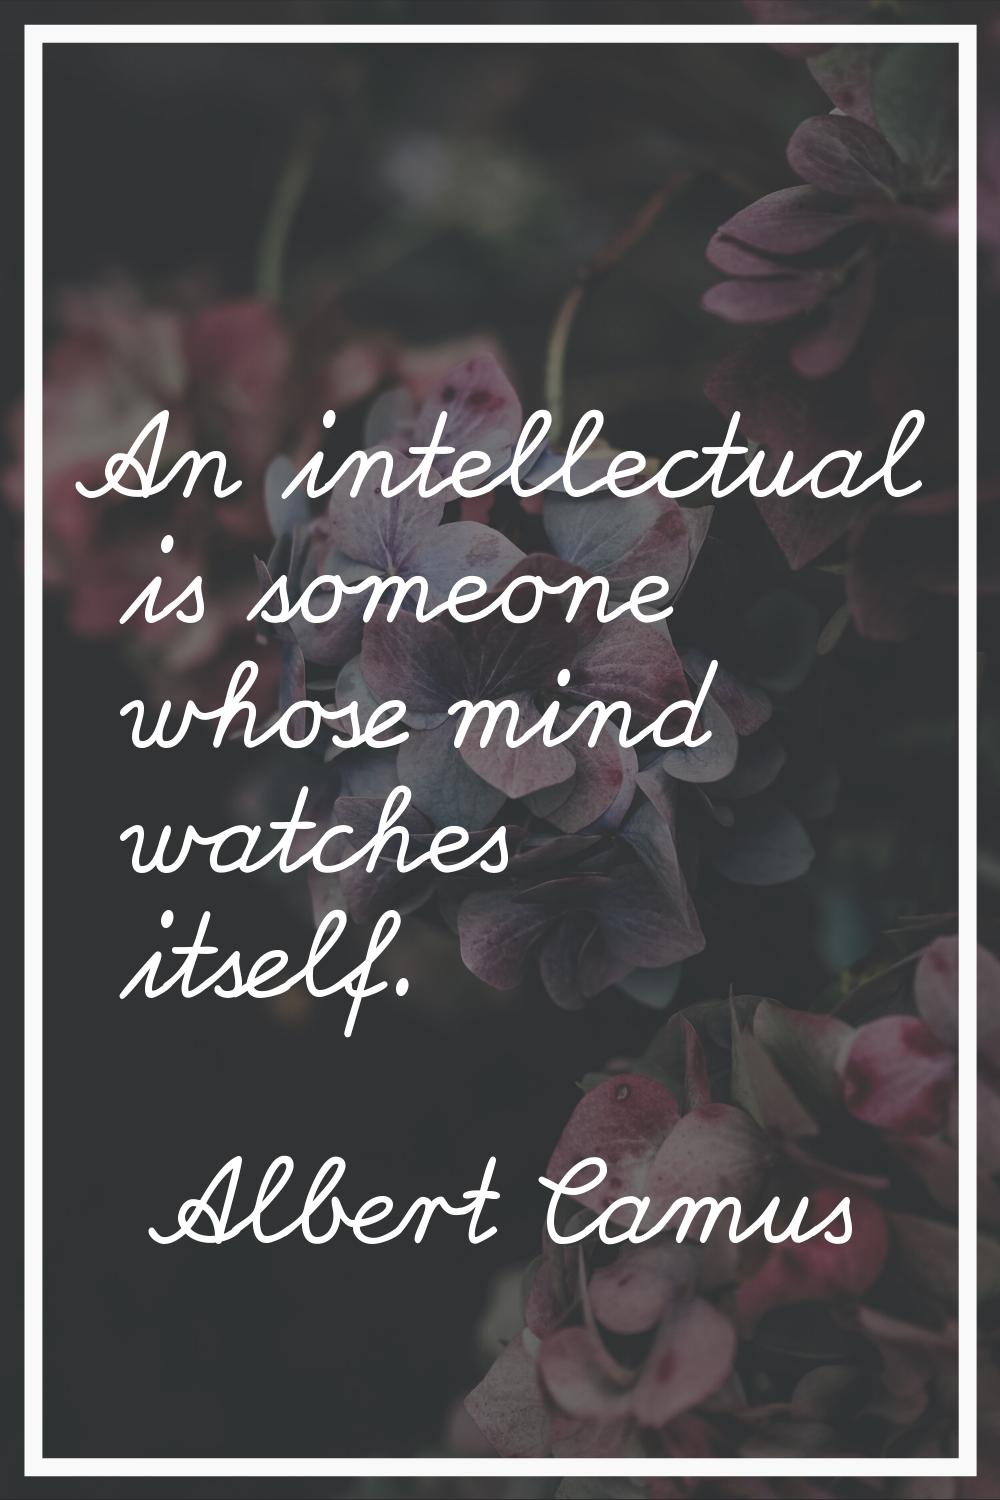 An intellectual is someone whose mind watches itself.